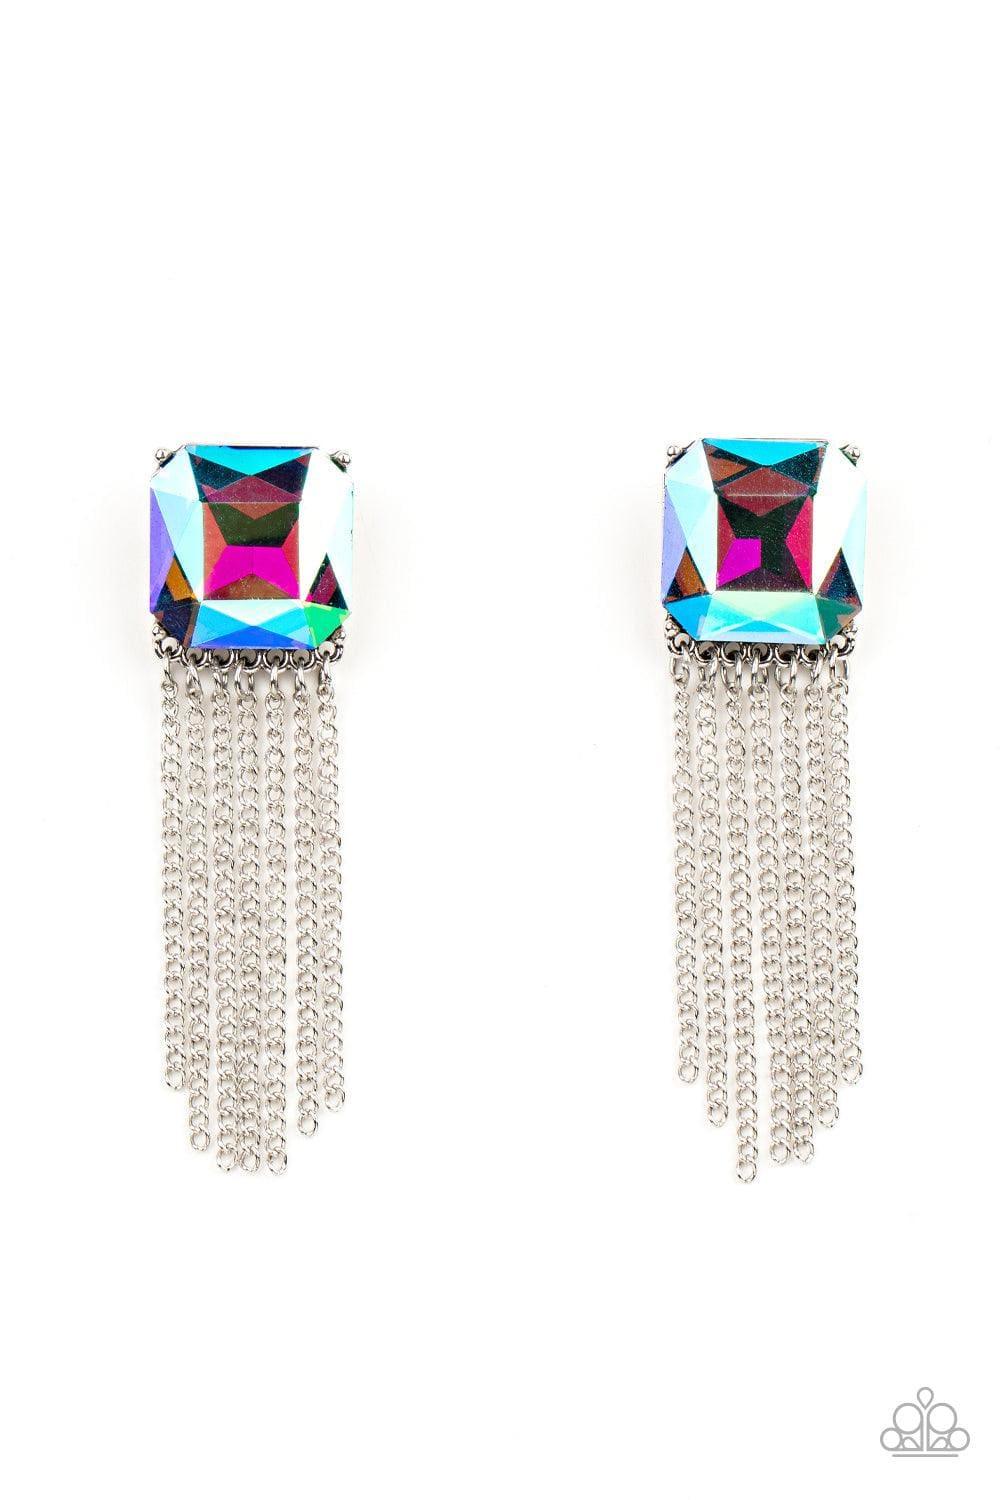 Paparazzi Accessories - Supernova Novelty - Multicolor Earrings - Bling by JessieK